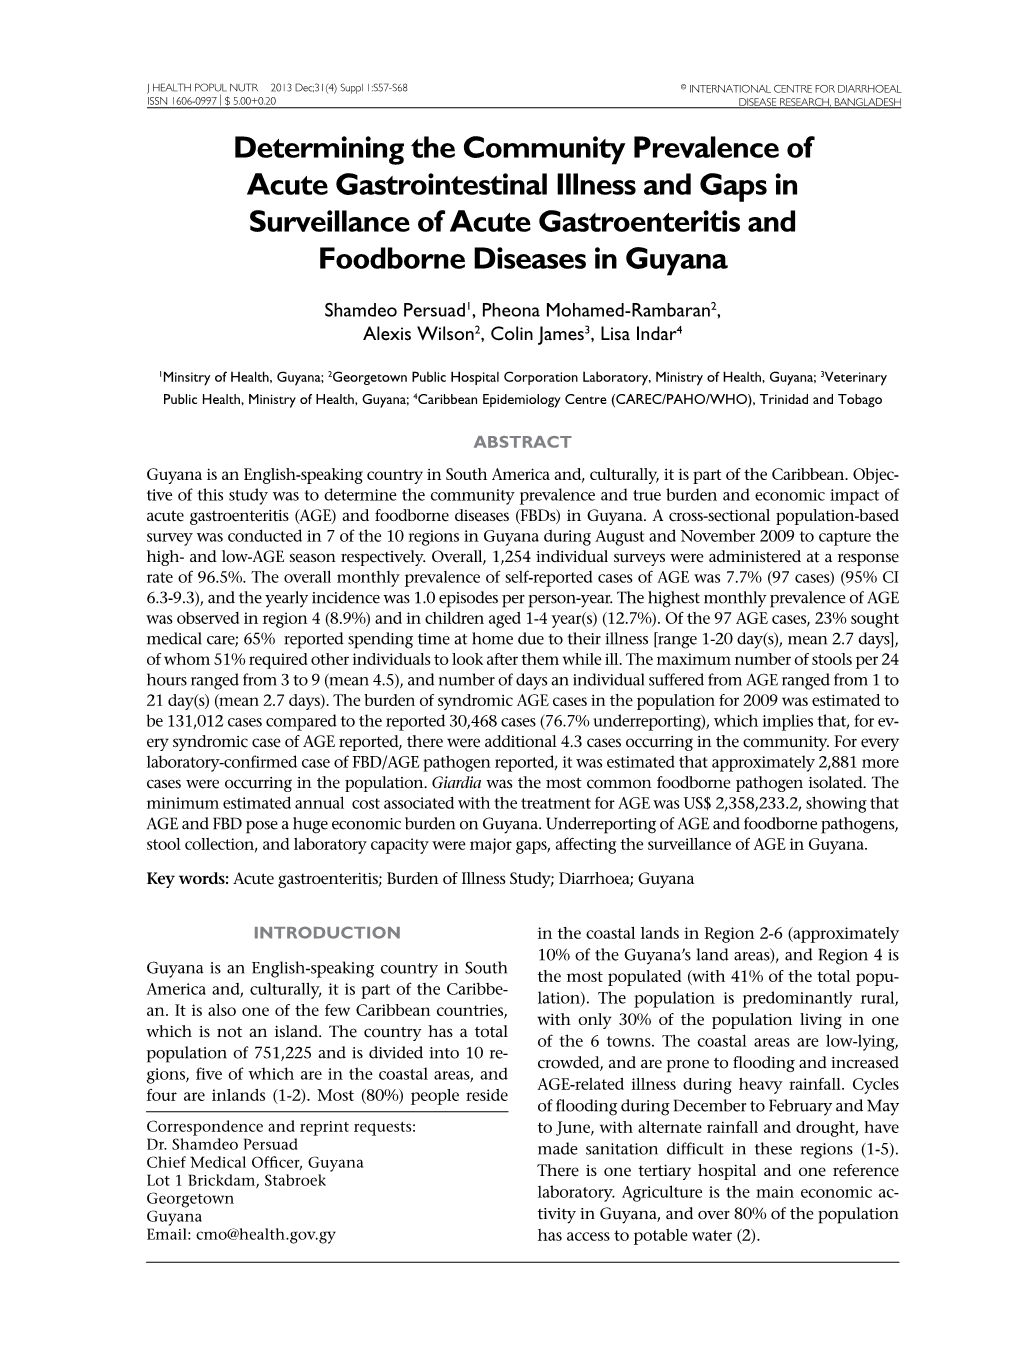 Determining the Community Prevalence of Acute Gastrointestinal Illness and Gaps in Surveillance of Acute Gastroenteritis and Foodborne Diseases in Guyana